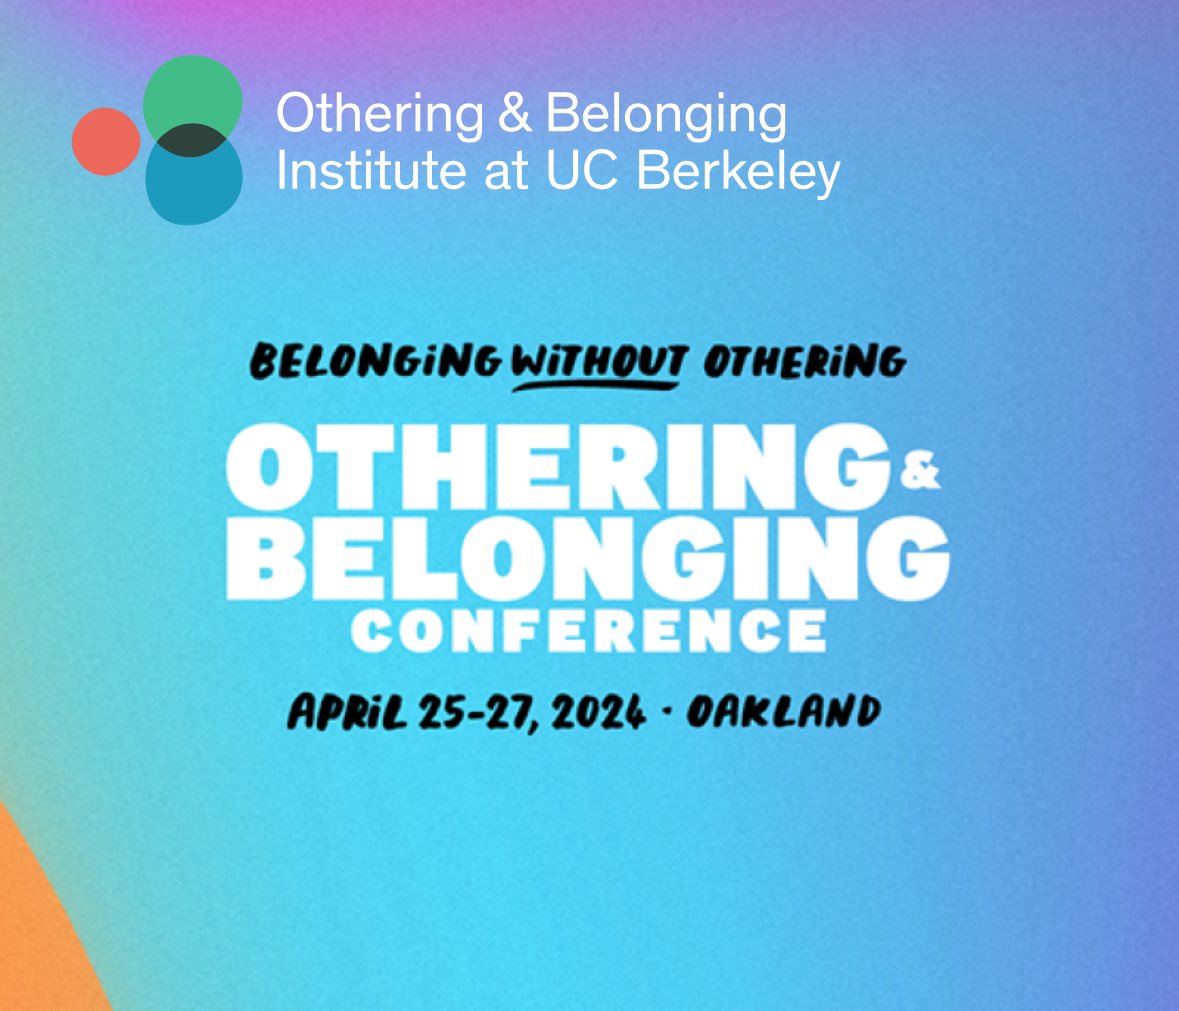 Look forward to speaking on the following panel titled “Long Bridging Toward Democracy and Belonging” this week at @oandbinstitute @UCBerkeley #OBCONF24 #Belonging April 25-27 2024, Oakland, California. More details via: shar.es/agsrIb